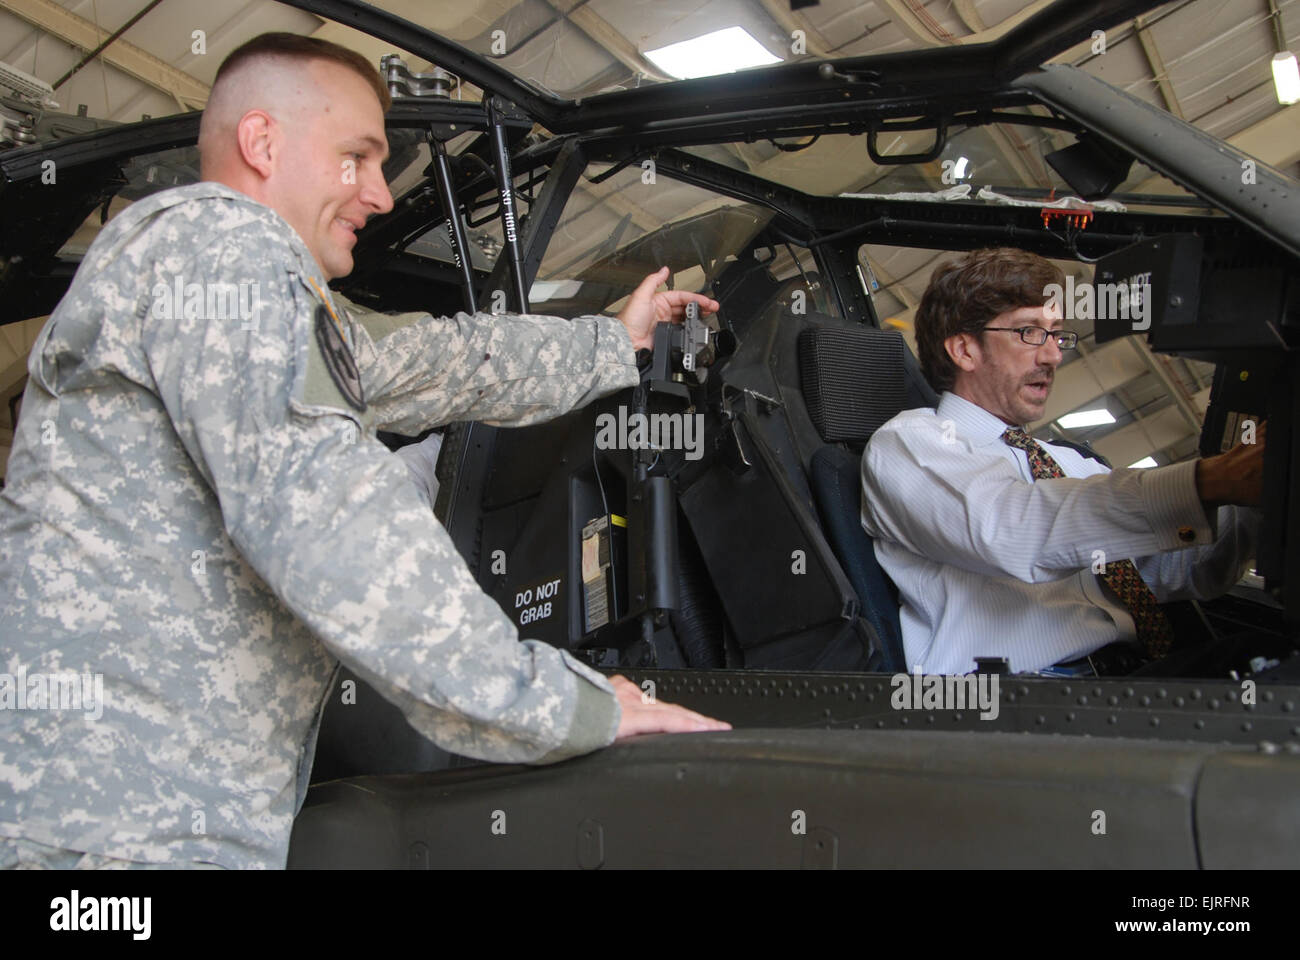 Sgt. 1st Class Ron Bolinsky, left committee chief in charge of Initial Entry Training students, 128th Aviation Brigade, Fort Eustis, Va., explains how to operate an AH-64D Apache Longbow helicopter at Felker Army Airfield to Trent Di Giulio of Dallas and member of the Defense Orientation Conference Association, during the DOCA's visit to Training and Doctrine Command the afternoon of July 30 at Fort Eustis, Va. U.S. Army  Sgt. 1st Class Kelly Jo Bridgwater, Training and Doctrine Command Public Affairs Stock Photo